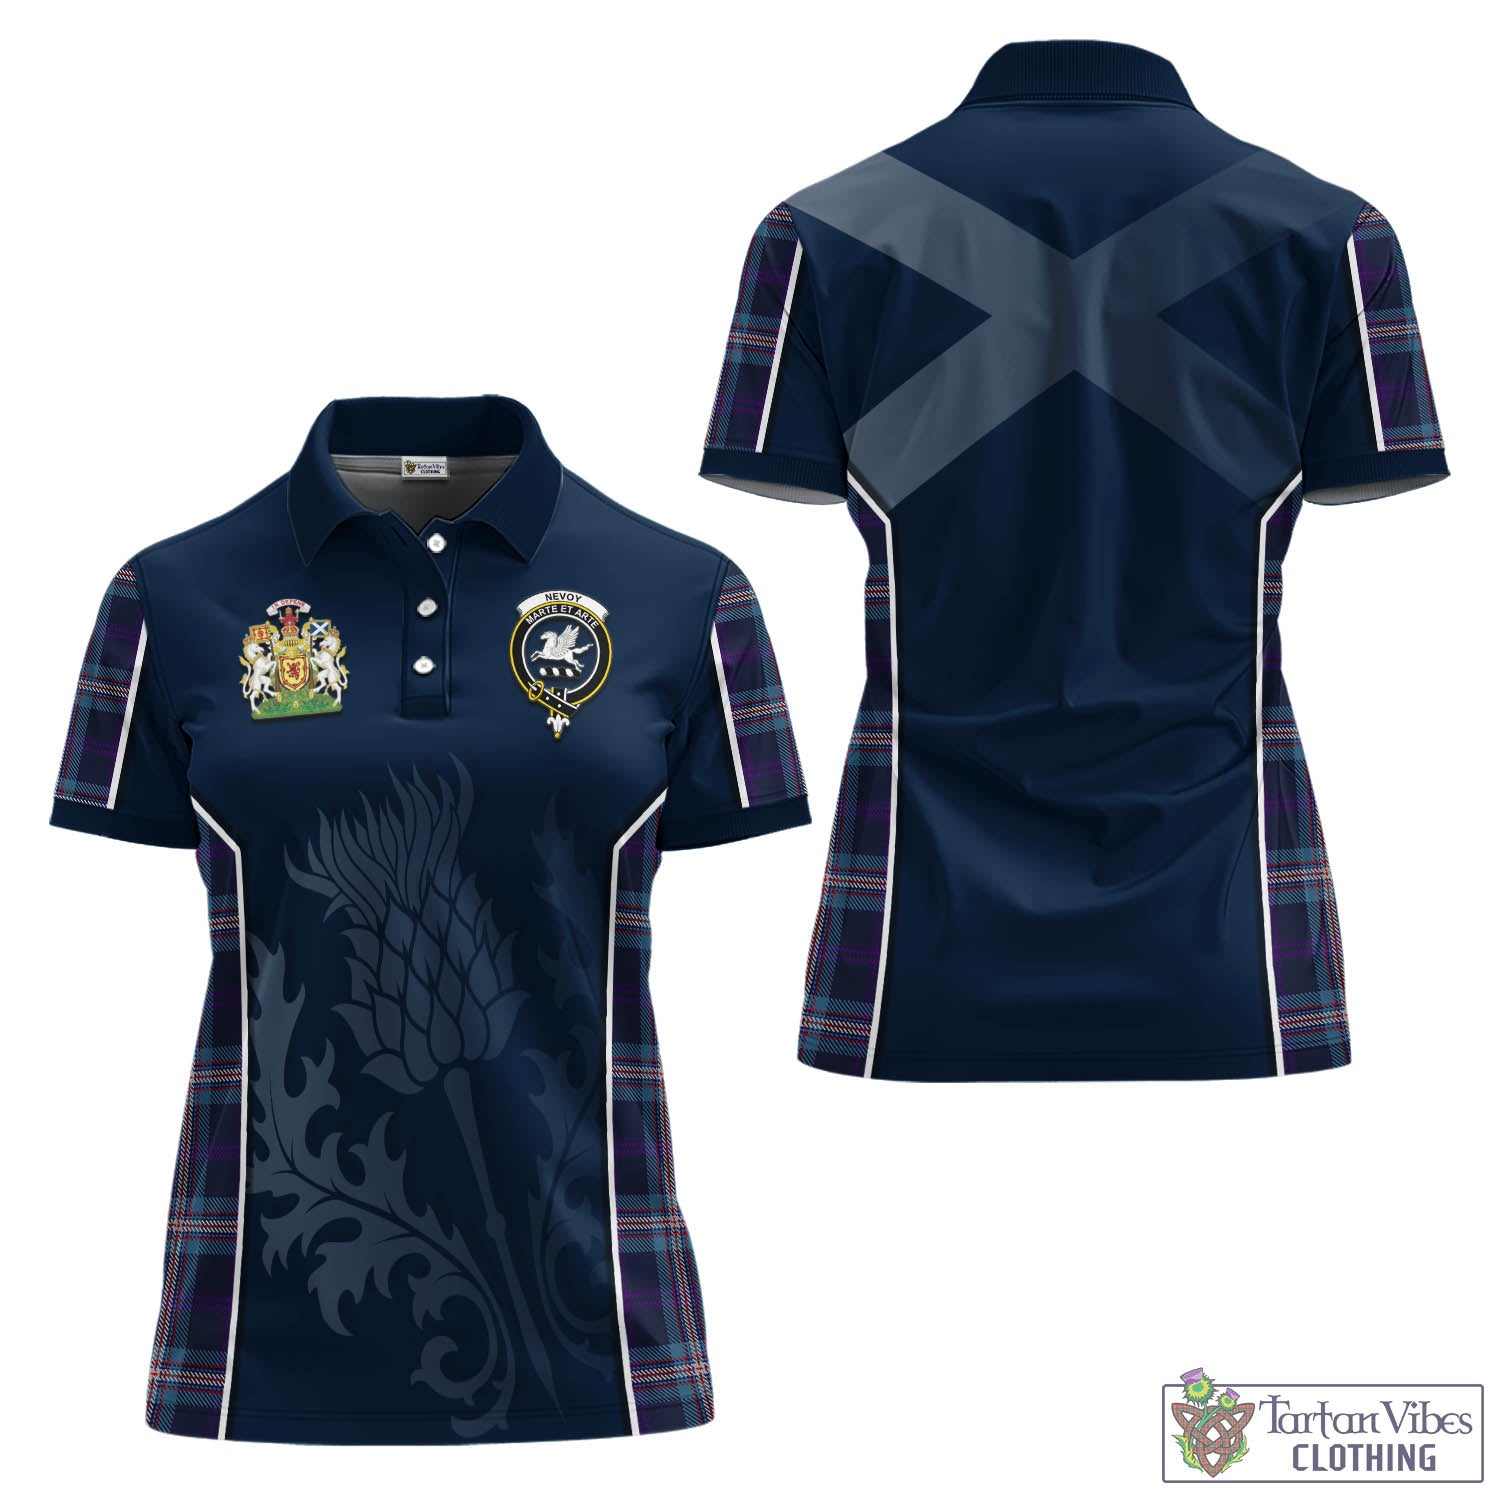 Tartan Vibes Clothing Nevoy Tartan Women's Polo Shirt with Family Crest and Scottish Thistle Vibes Sport Style